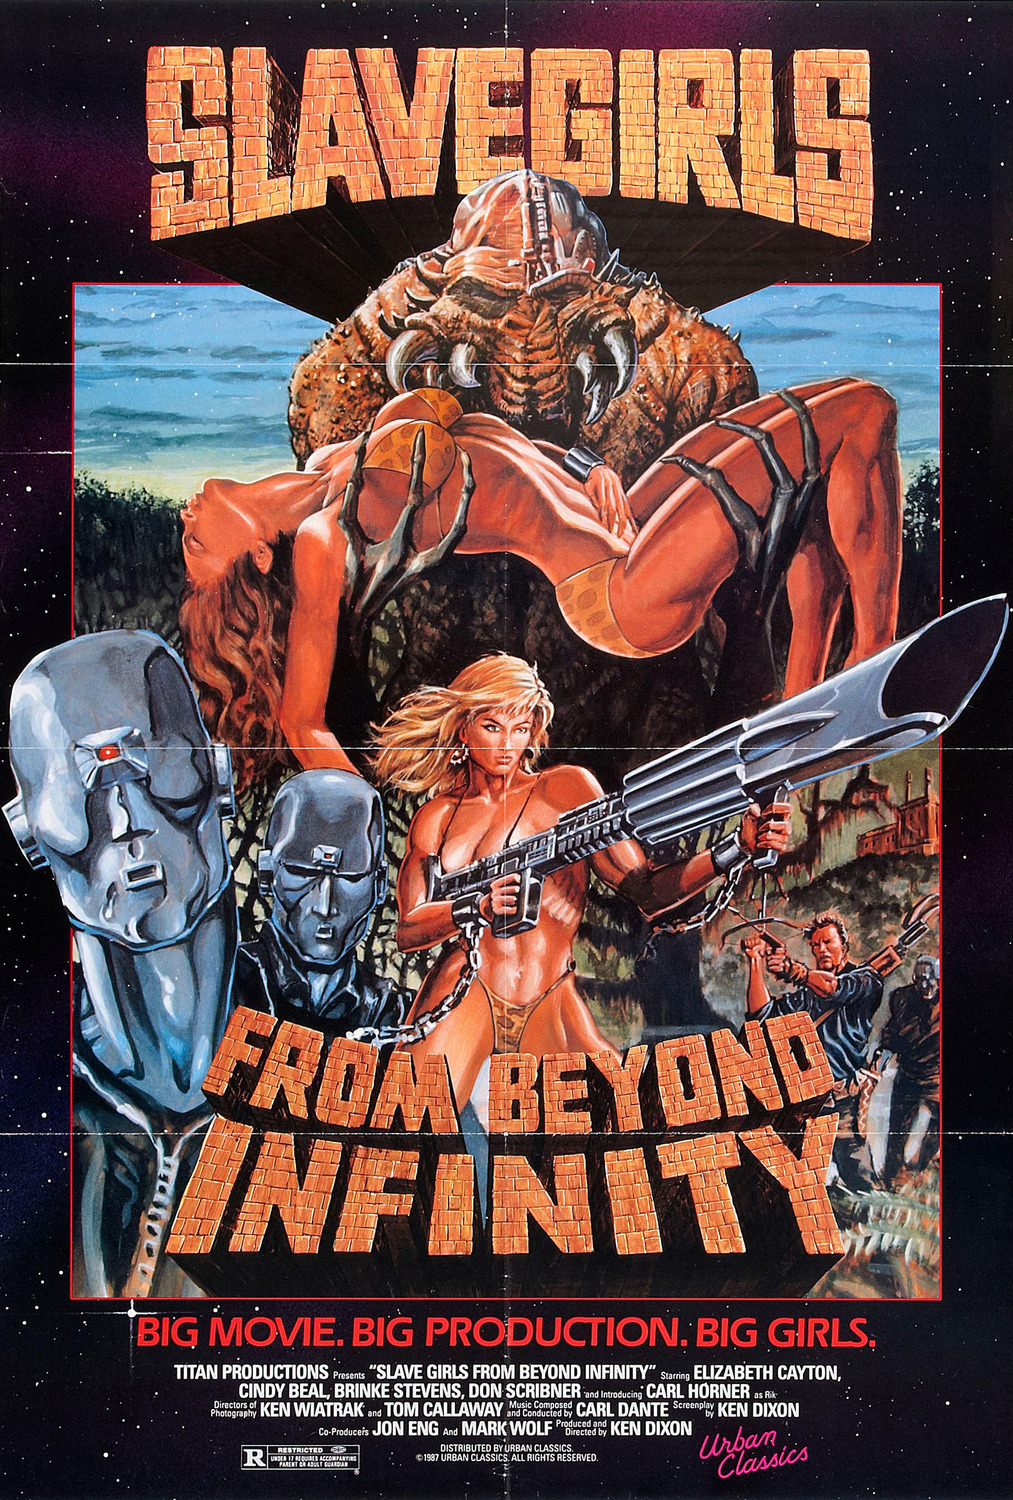 Extra Large Movie Poster Image for Slave Girls from Beyond Infinity 